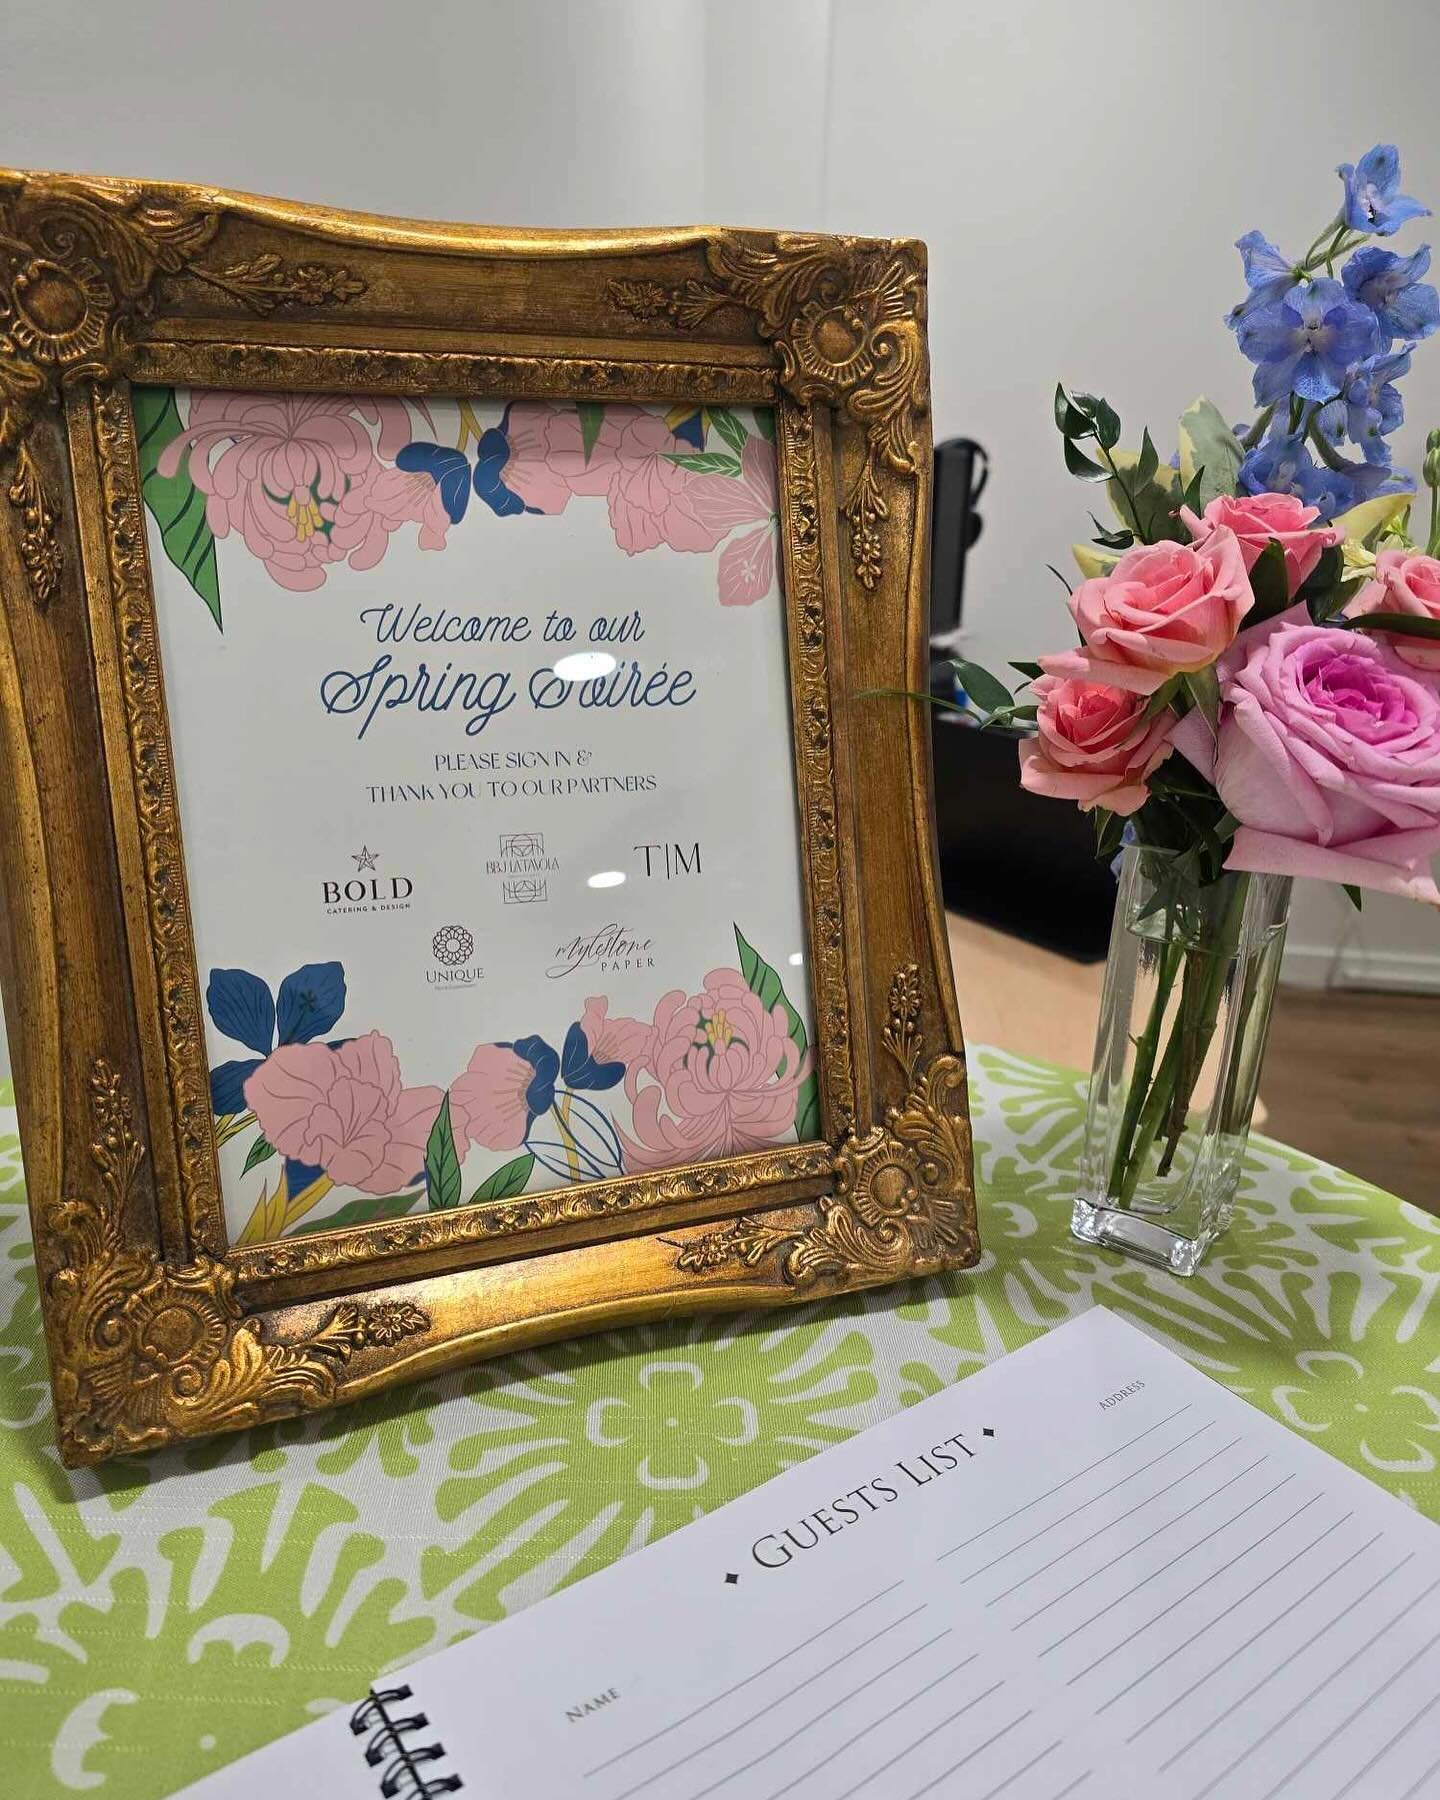 Our @abcassoc Georgia members recently got together at Spring Soriee, hosted by @bbjlatavola at their Atlanta Showroom. For many wedding planners being in a design showroom and getting to see all of the new possibilities is their &ldquo;happy place&r